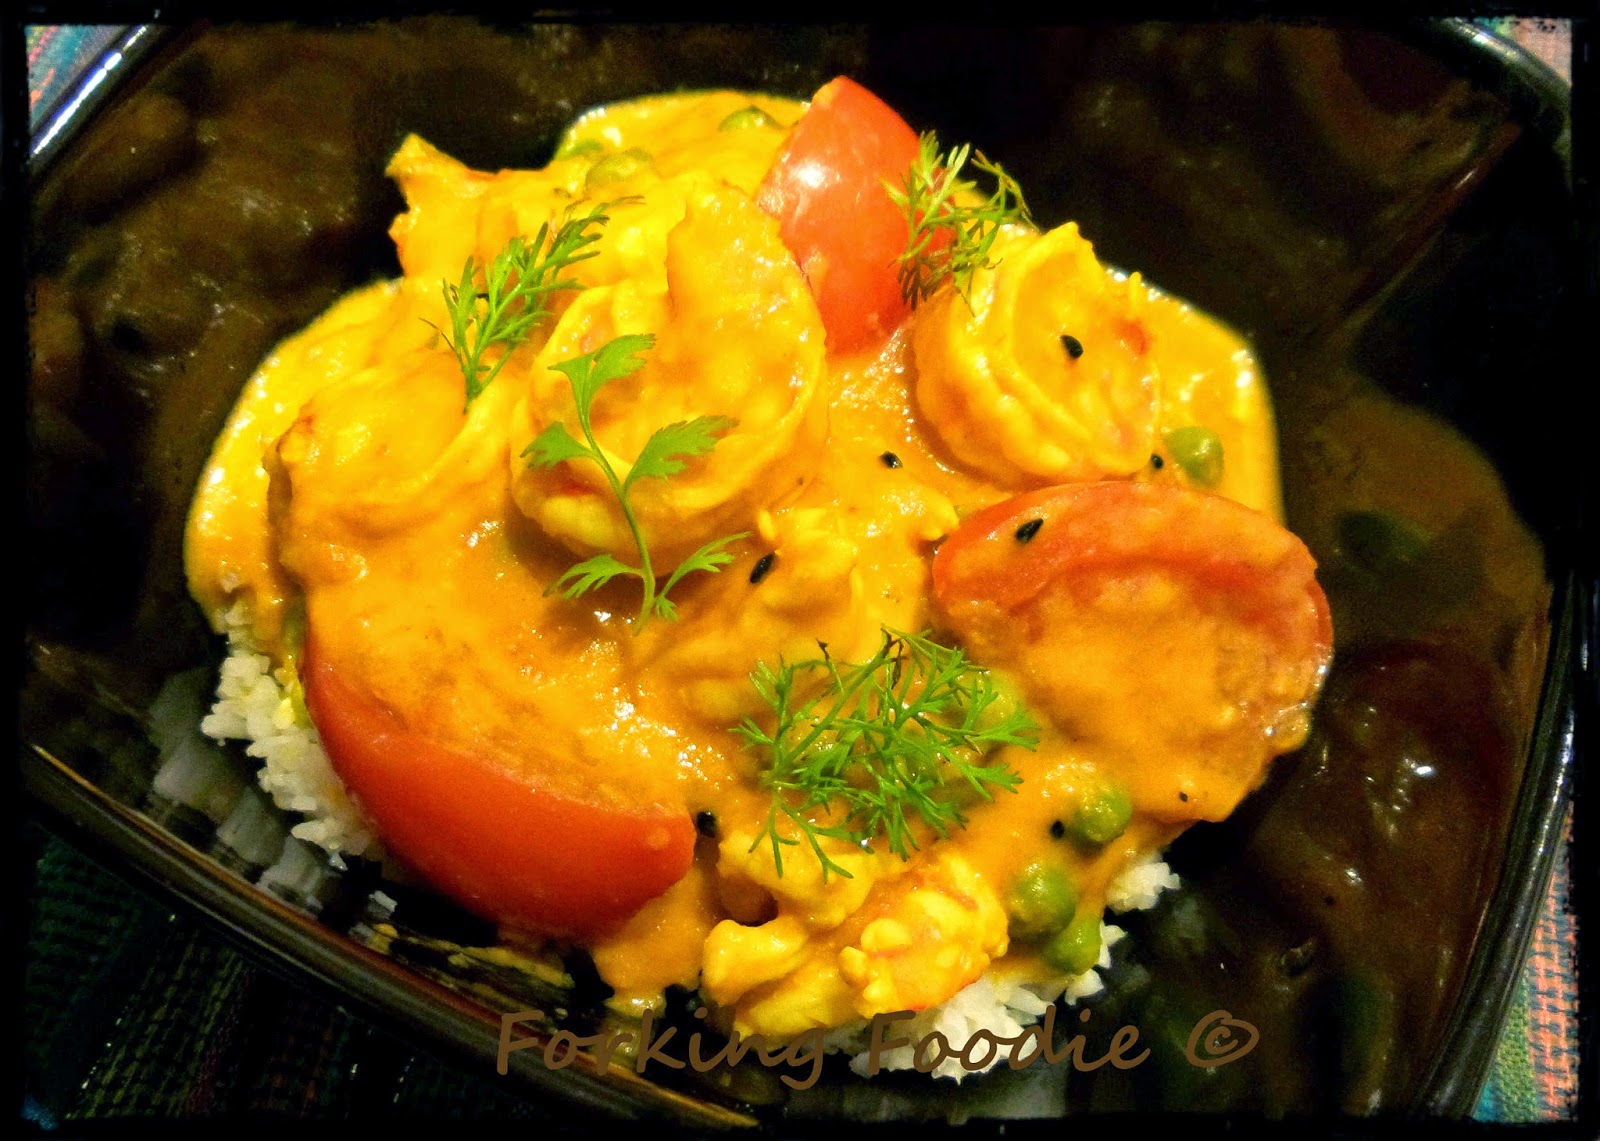 Prawn and coconut curry